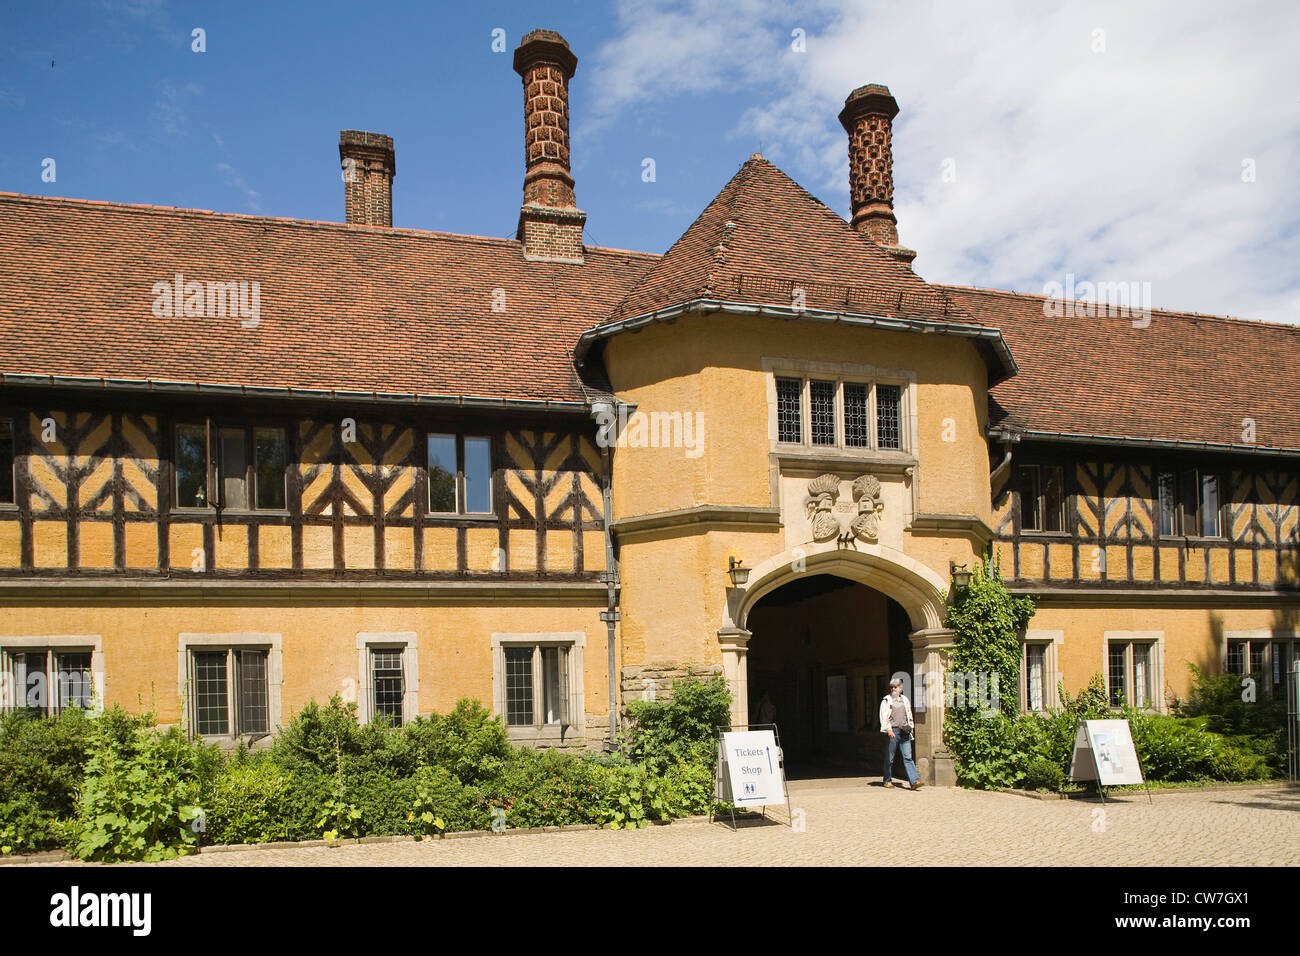 Europe, Germany, Brandenburg, Potsdam, Cecilienhof, where took place the Potsdam Conference in 1945 Stock Photo